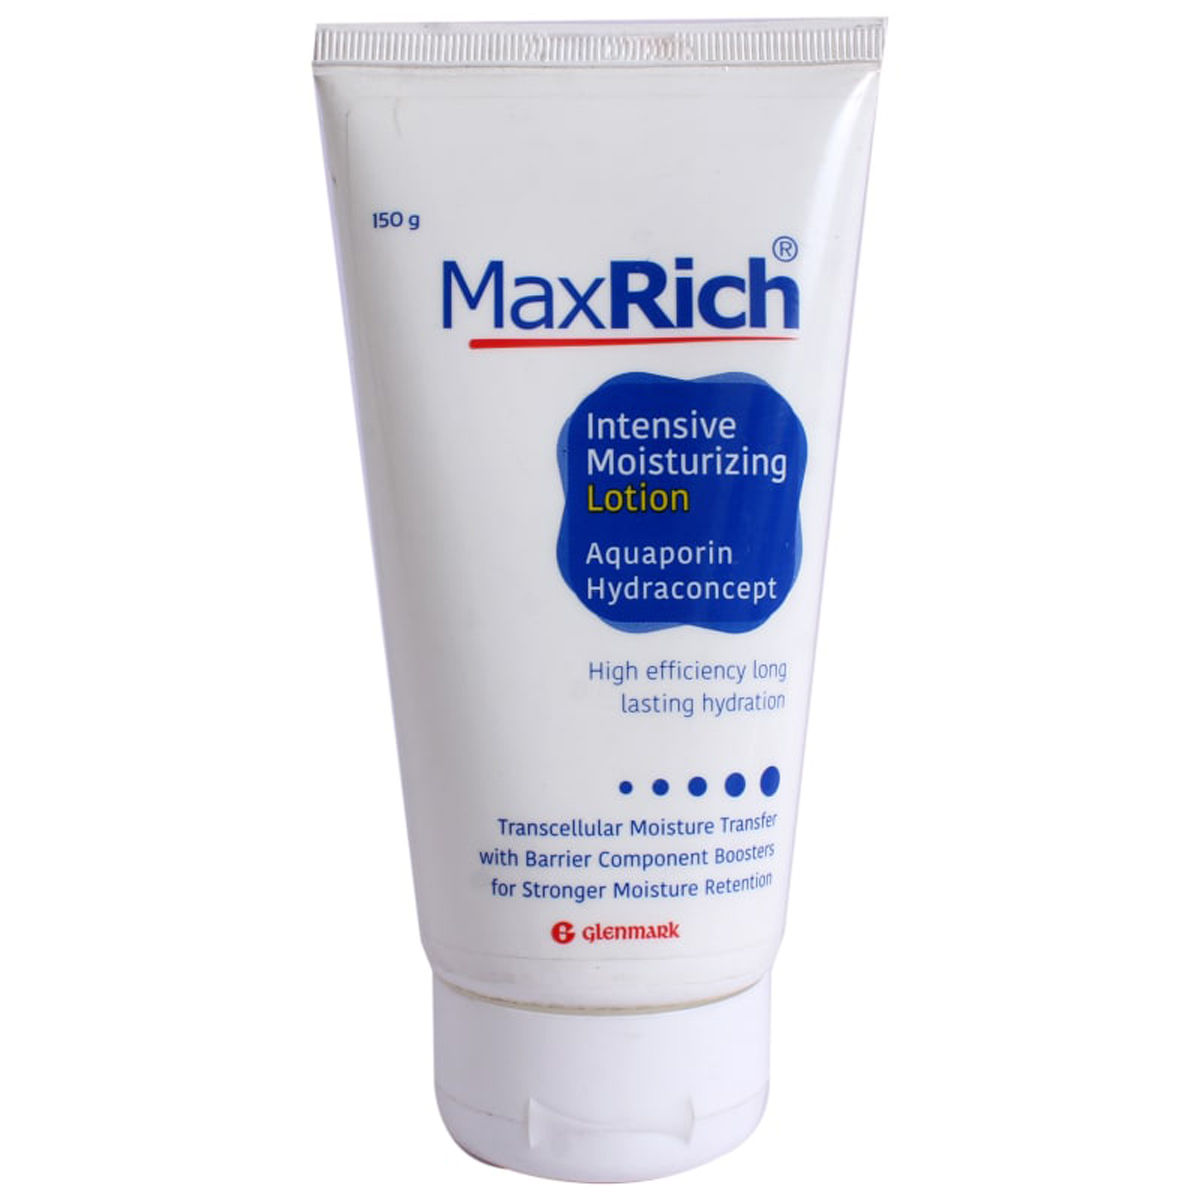 Maxrich Intensive Moisturizing Lotion 150G, Pack of 1 